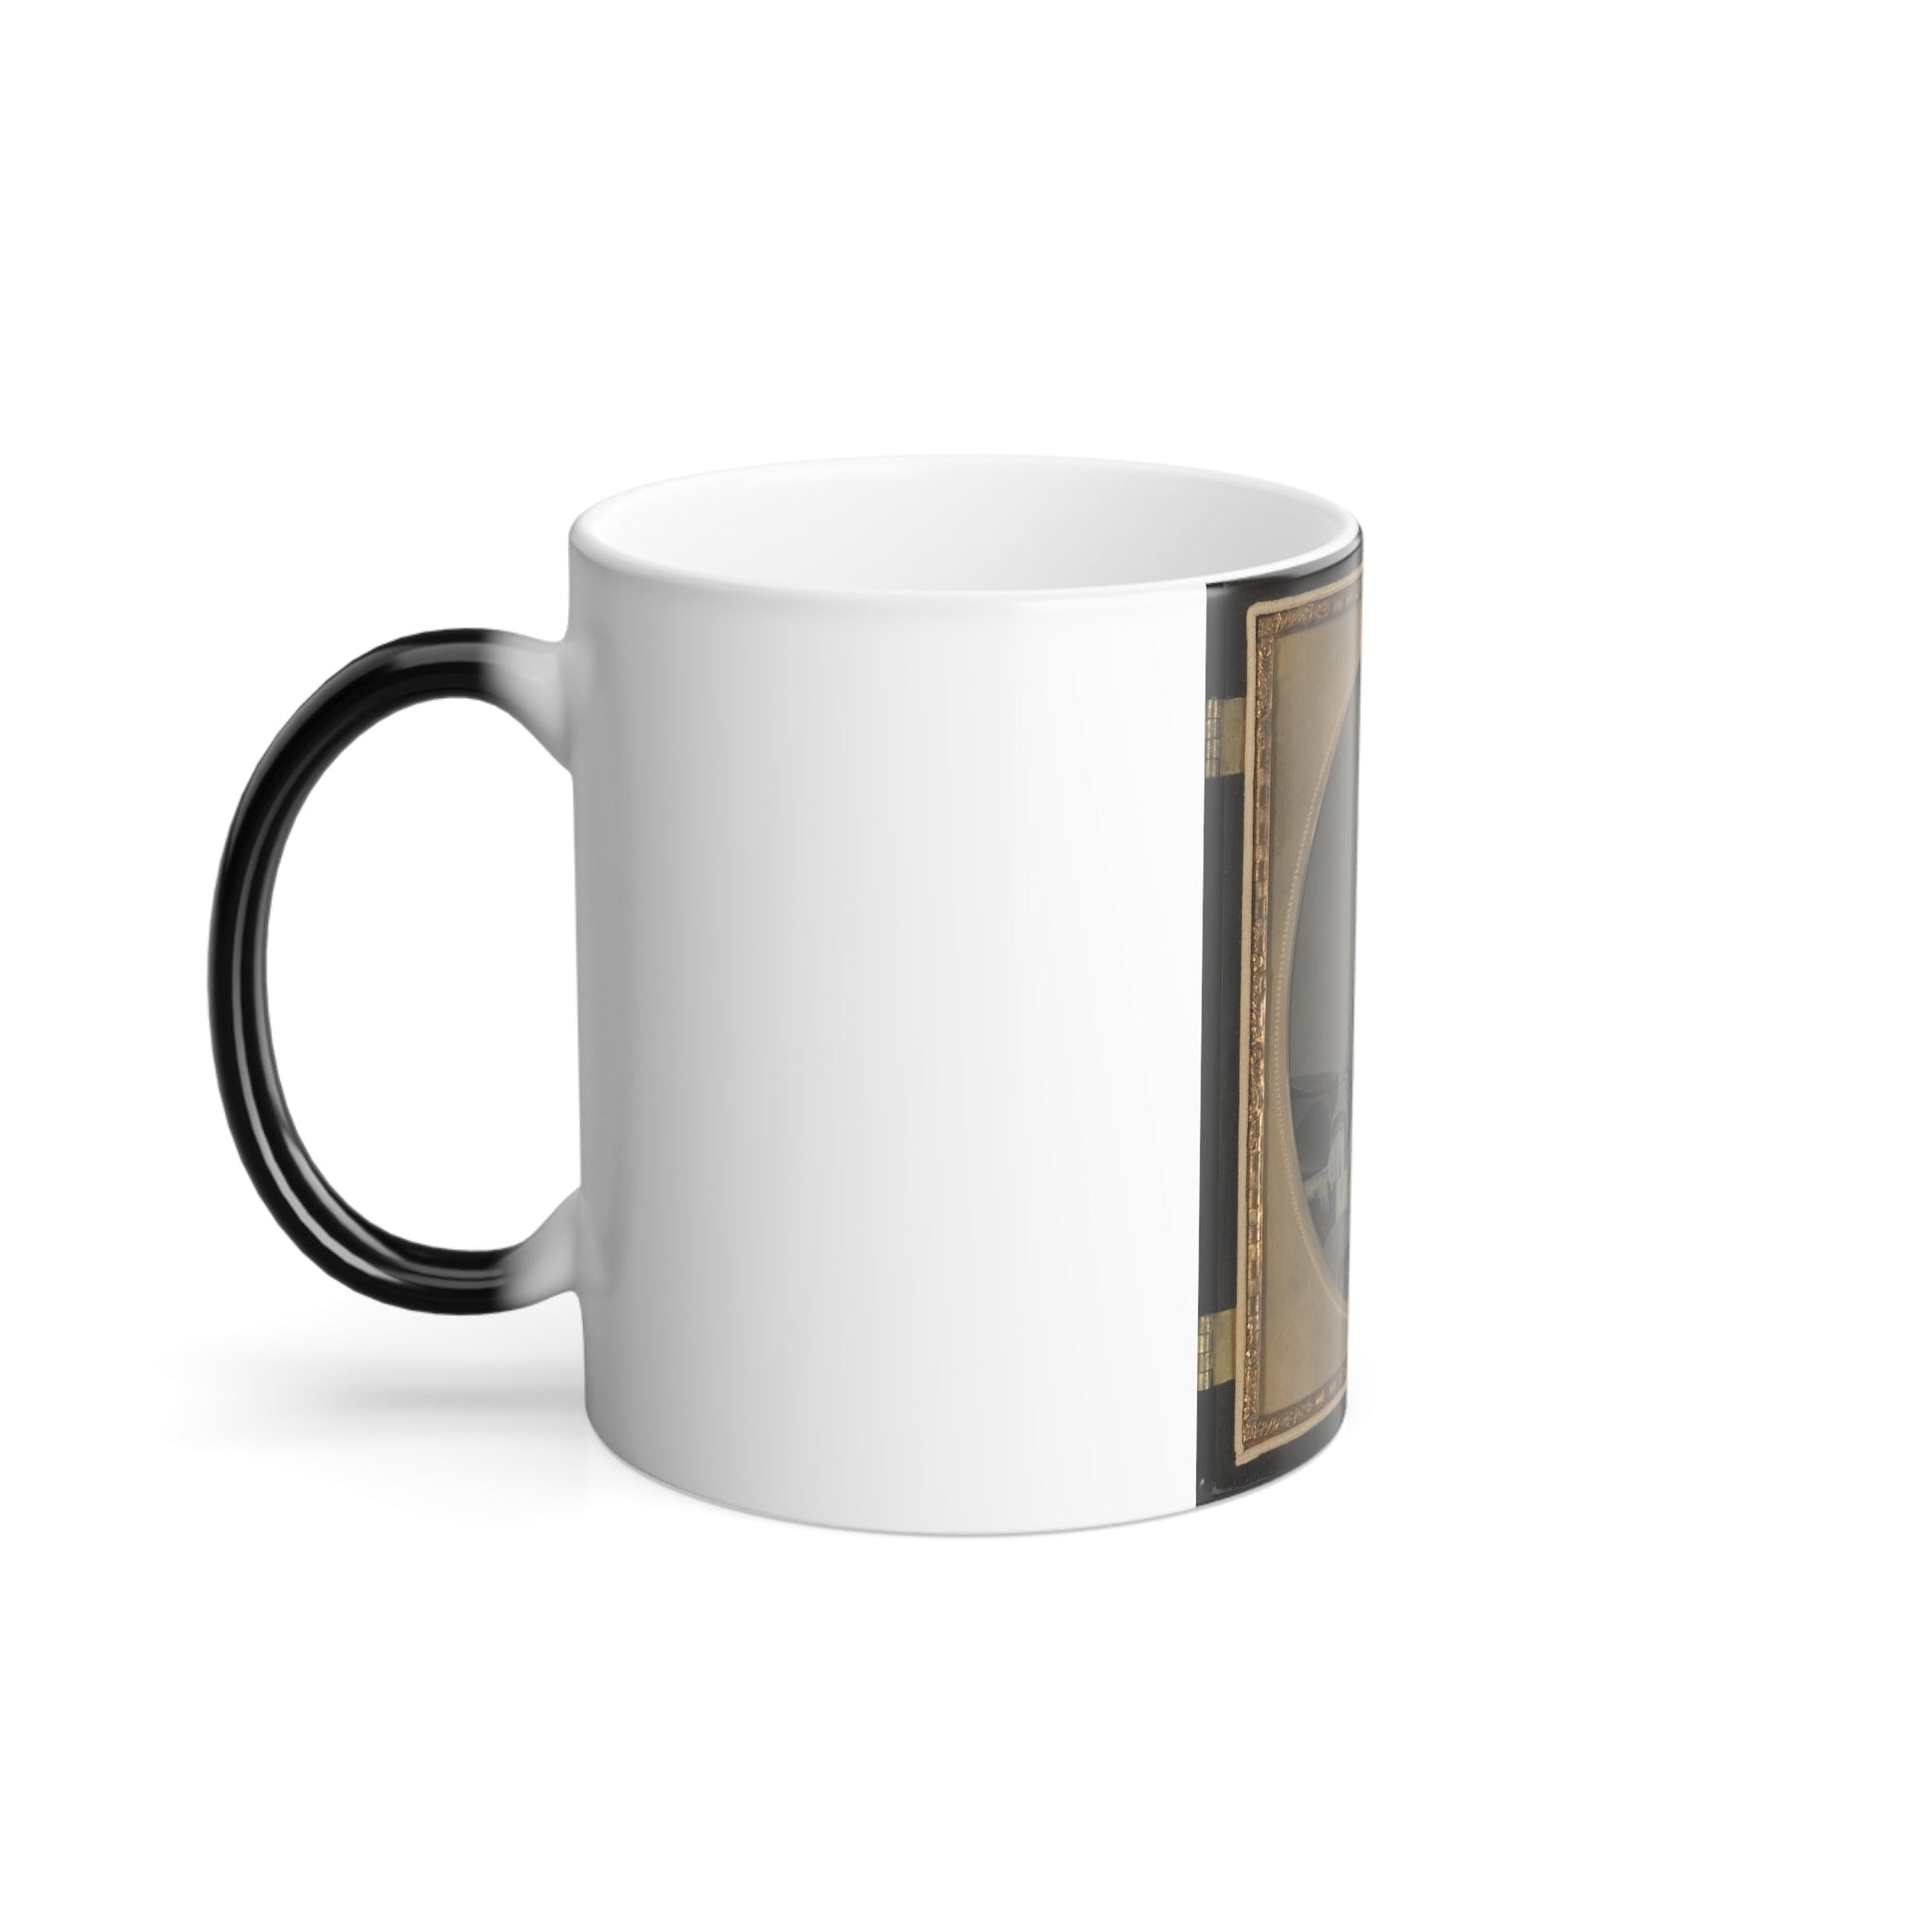 Private W.R. Clack of Co. B, 43Rd Tennessee Infantry Regiment, With Saber, Pistol, and Small Book (U.S. Civil War) Color Morphing Mug 11oz-11oz-The Sticker Space